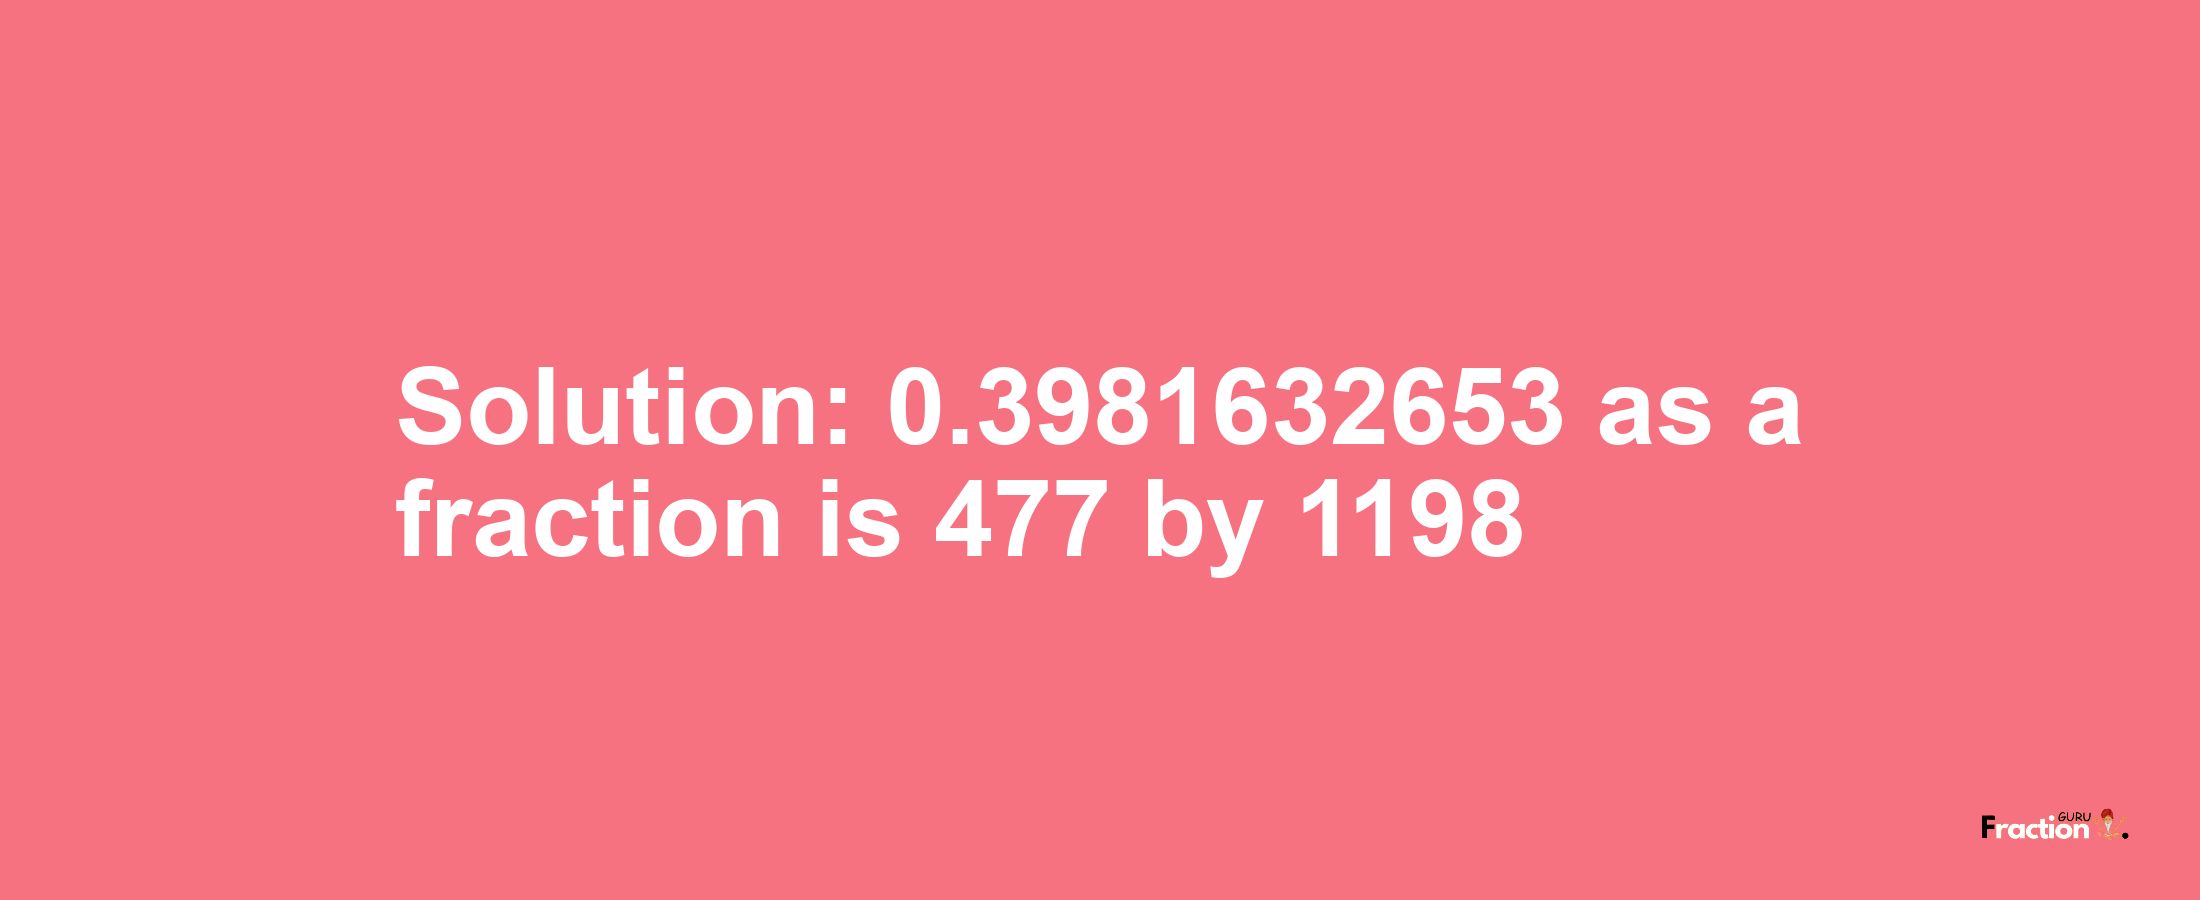 Solution:0.3981632653 as a fraction is 477/1198